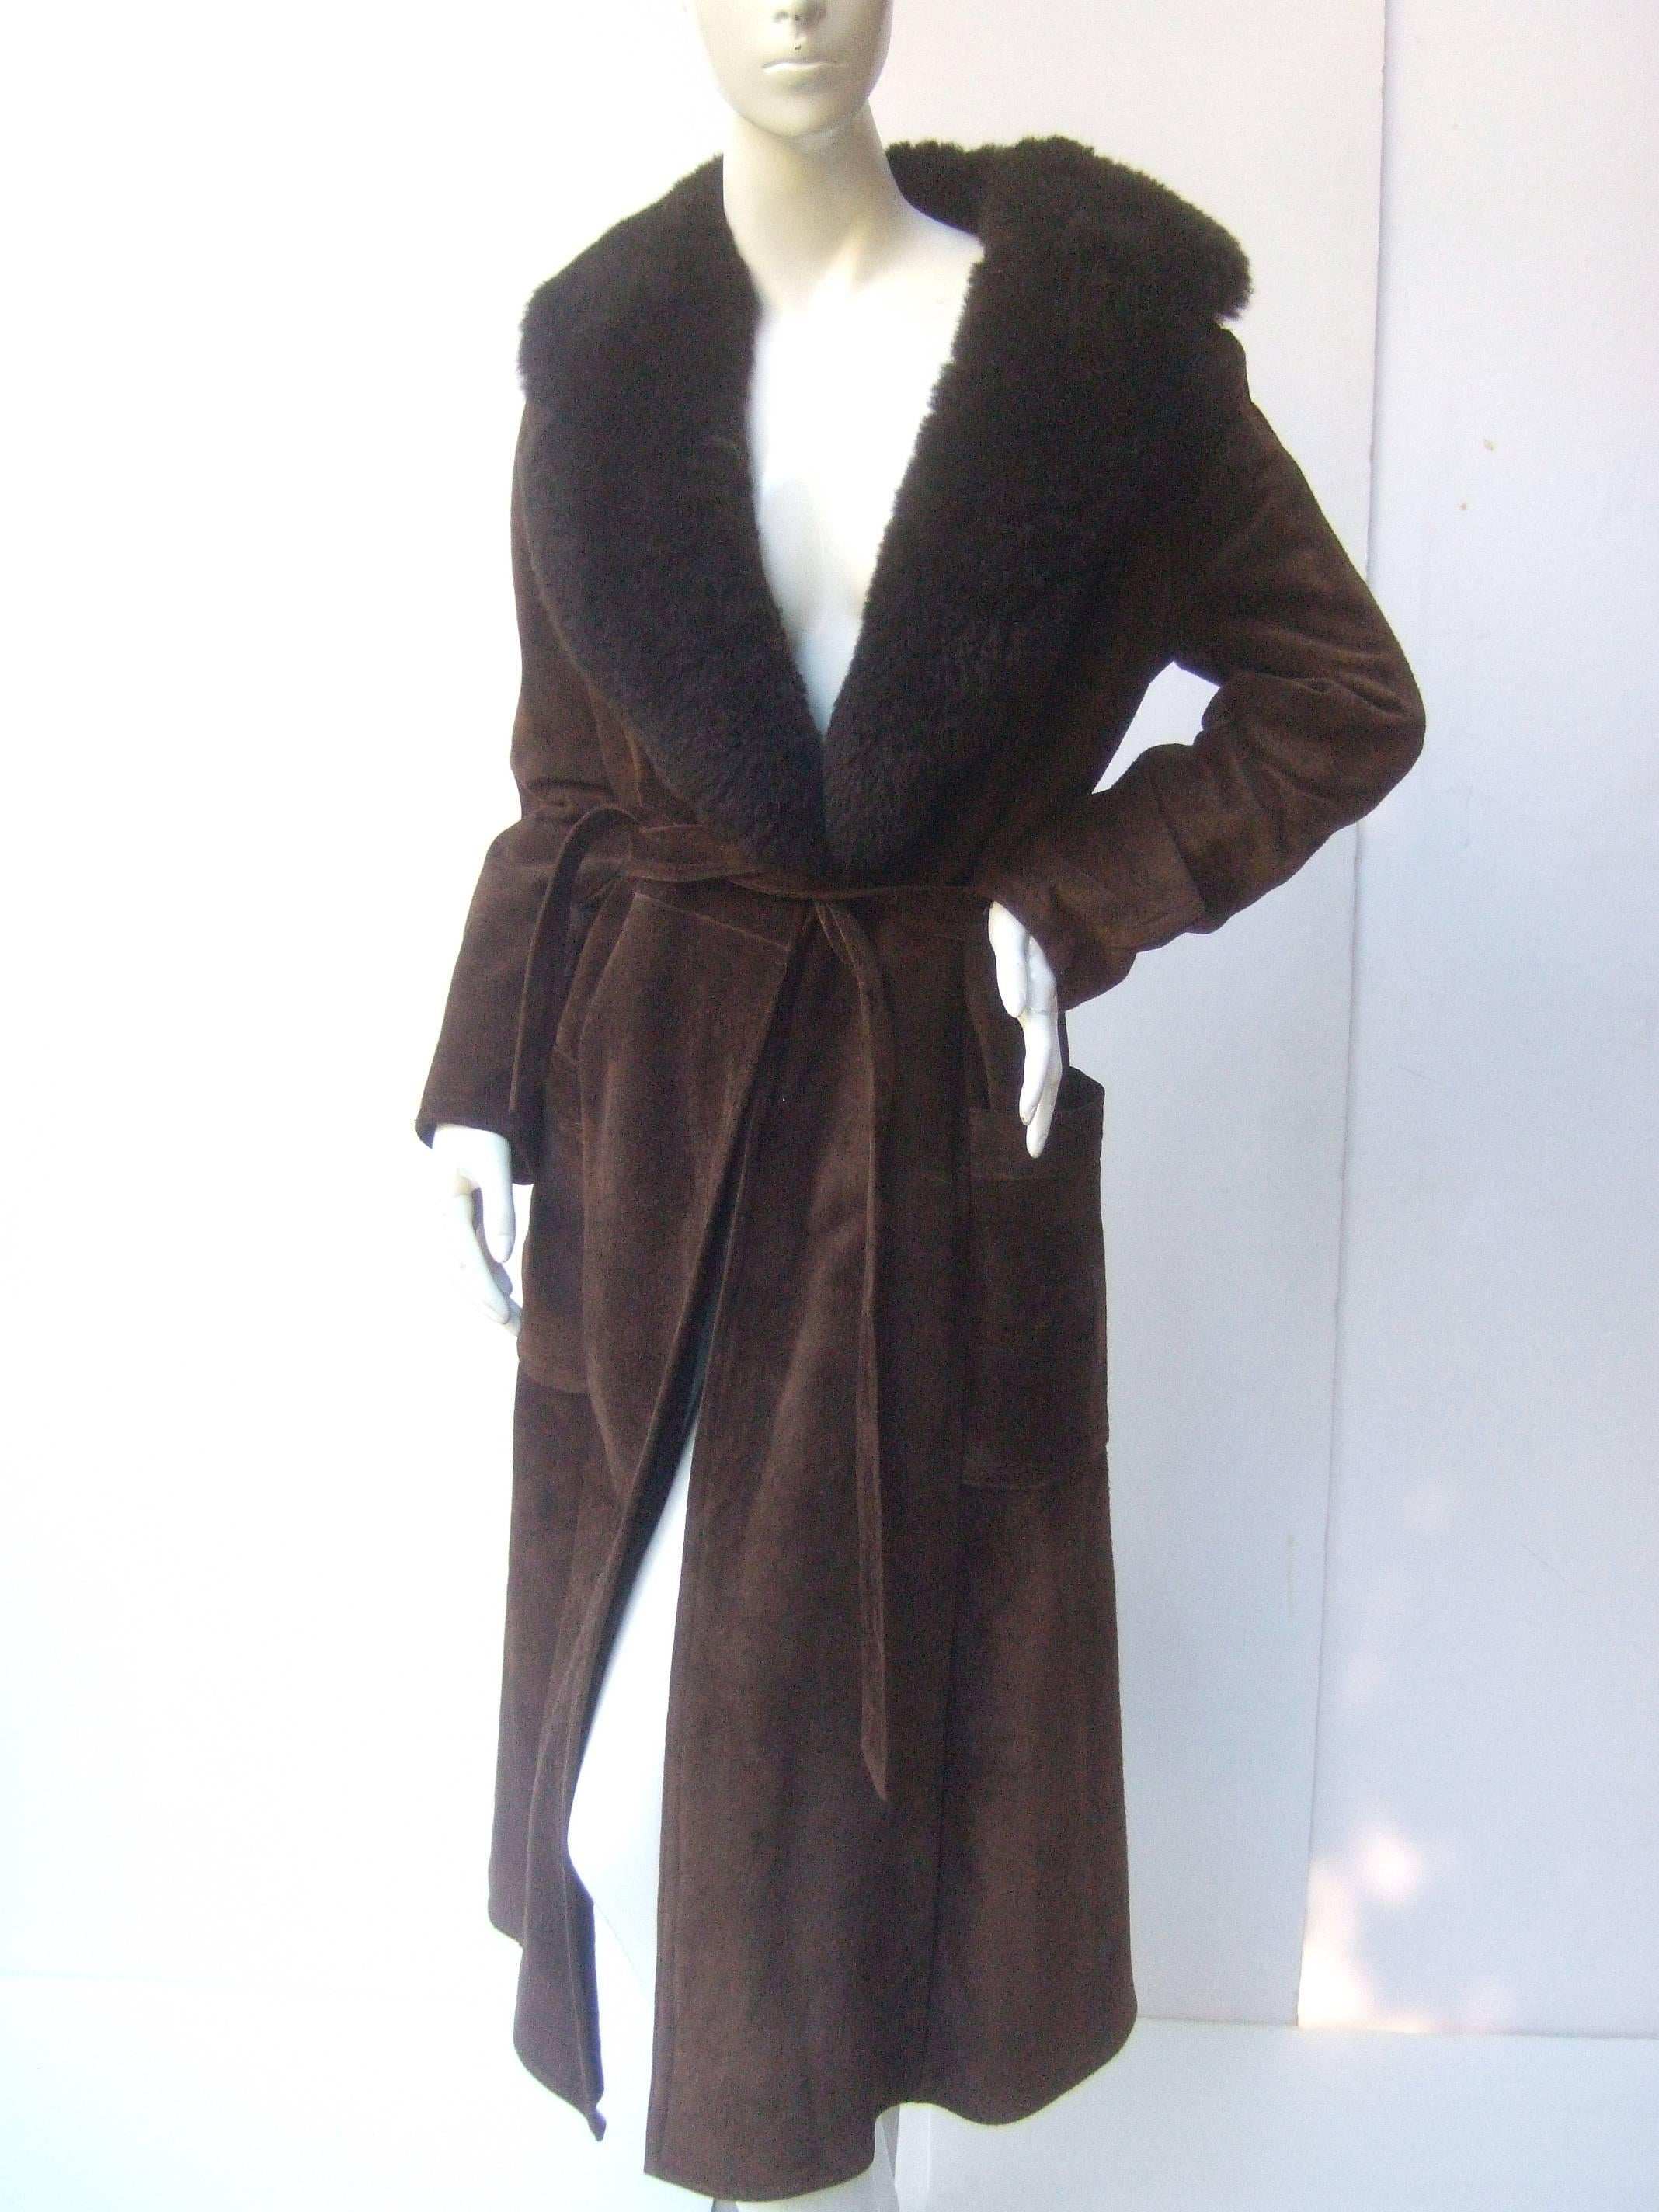 Saks Fifth Avenue Brown suede belted coat c 1970s
The vintage brown suede coat is designed with 
a wide lamb fur collar

The belted suede coat has two deep pockets
on both sides of the front. The inside is lined
in plush brown faux fur

The